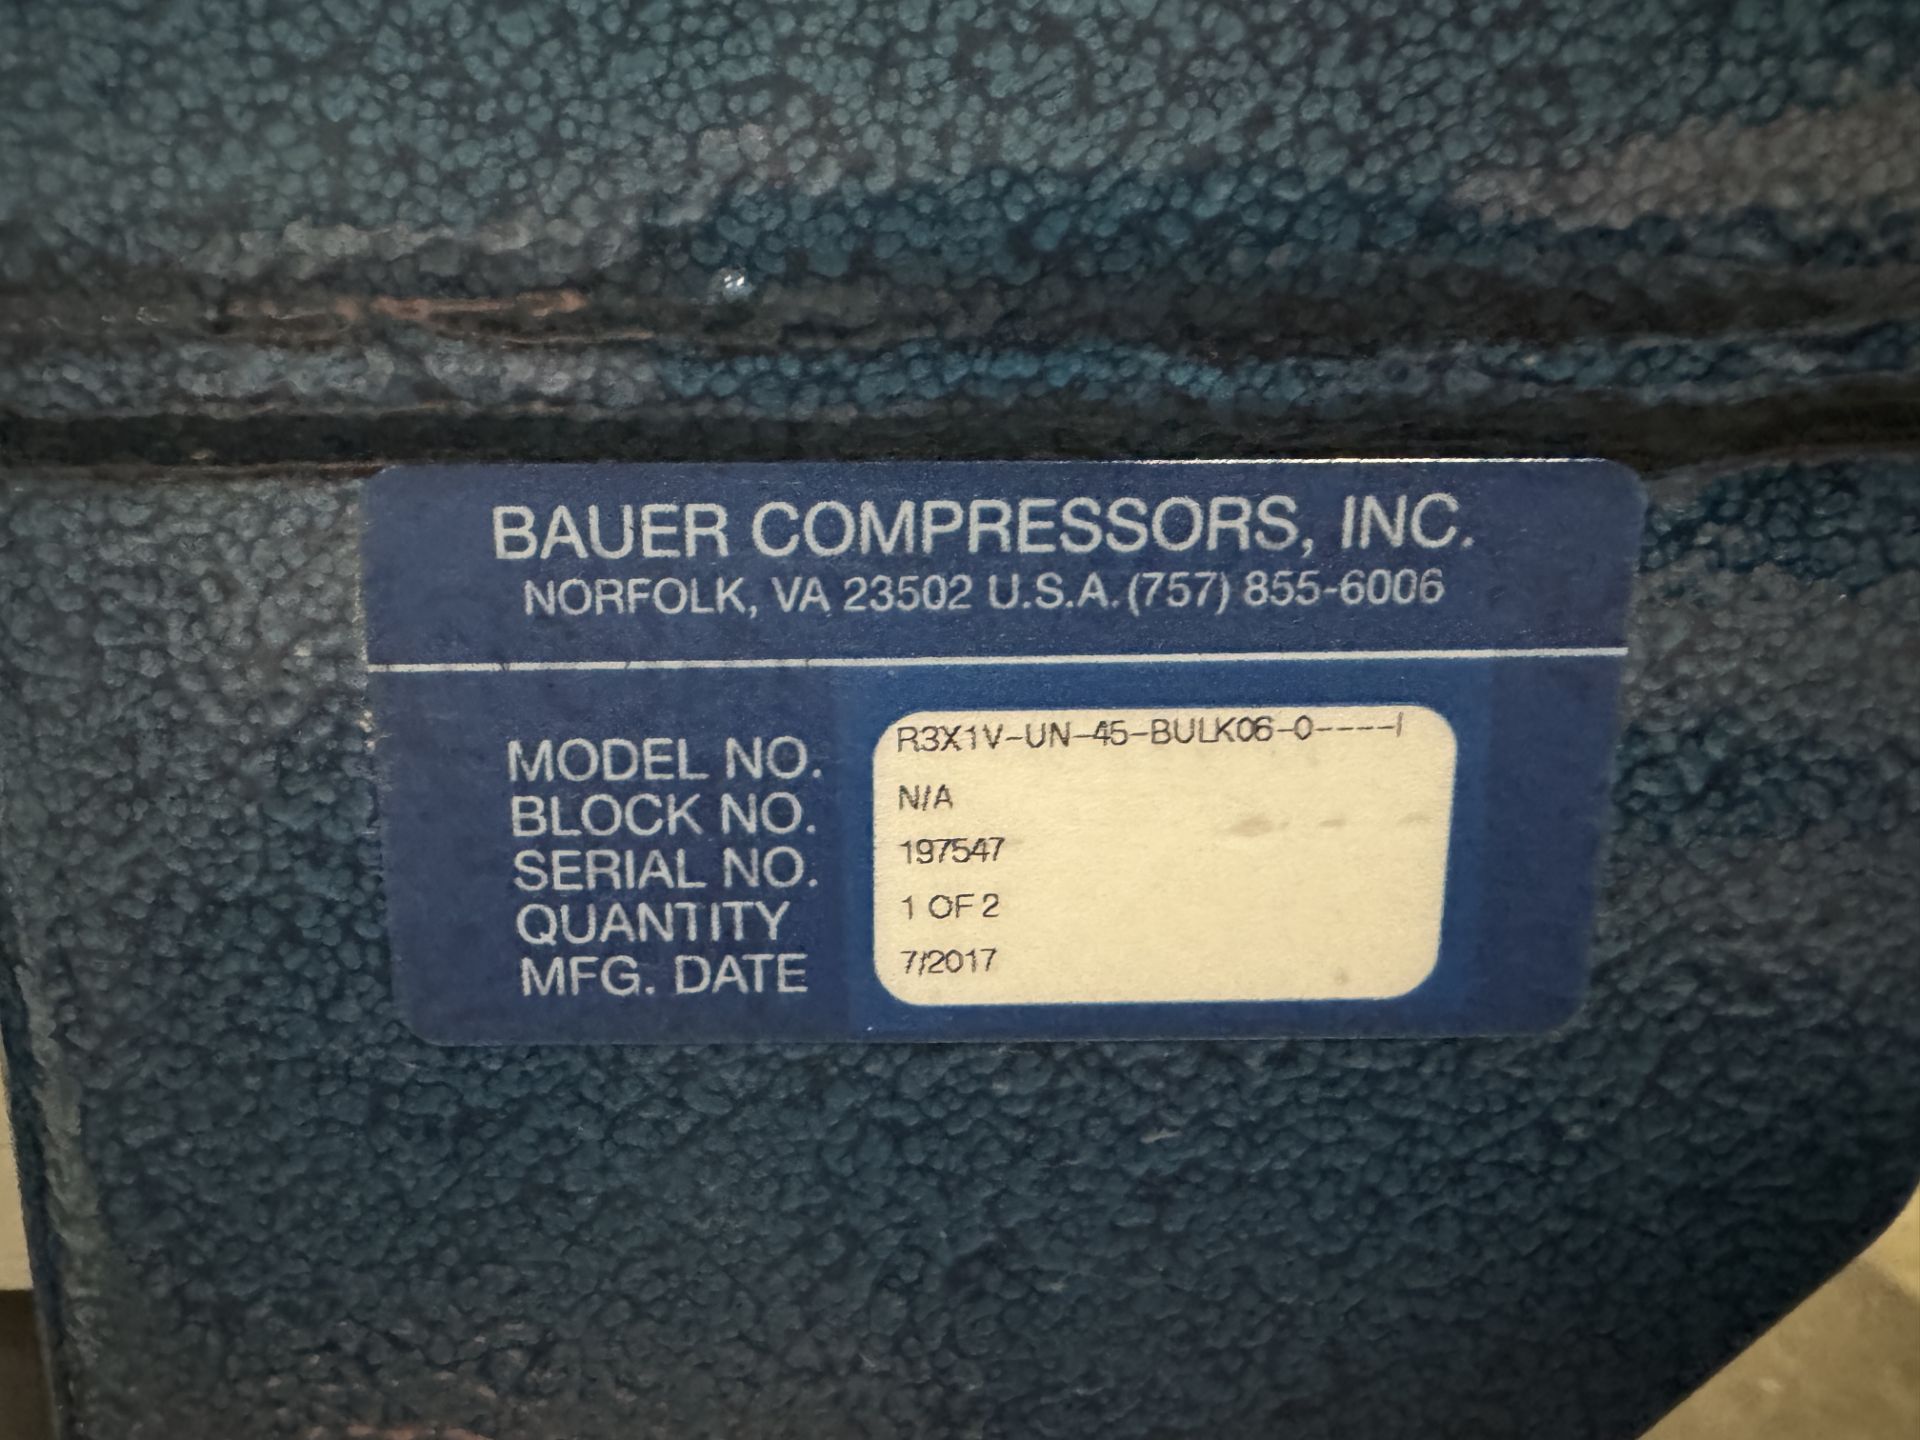 PALLET WITH (6) BAUER HIGH PRESSURE COMPRESSED AIR TANKS MODEL # R3X2V-UN-BULK06-0 SERIAL # - Image 3 of 4